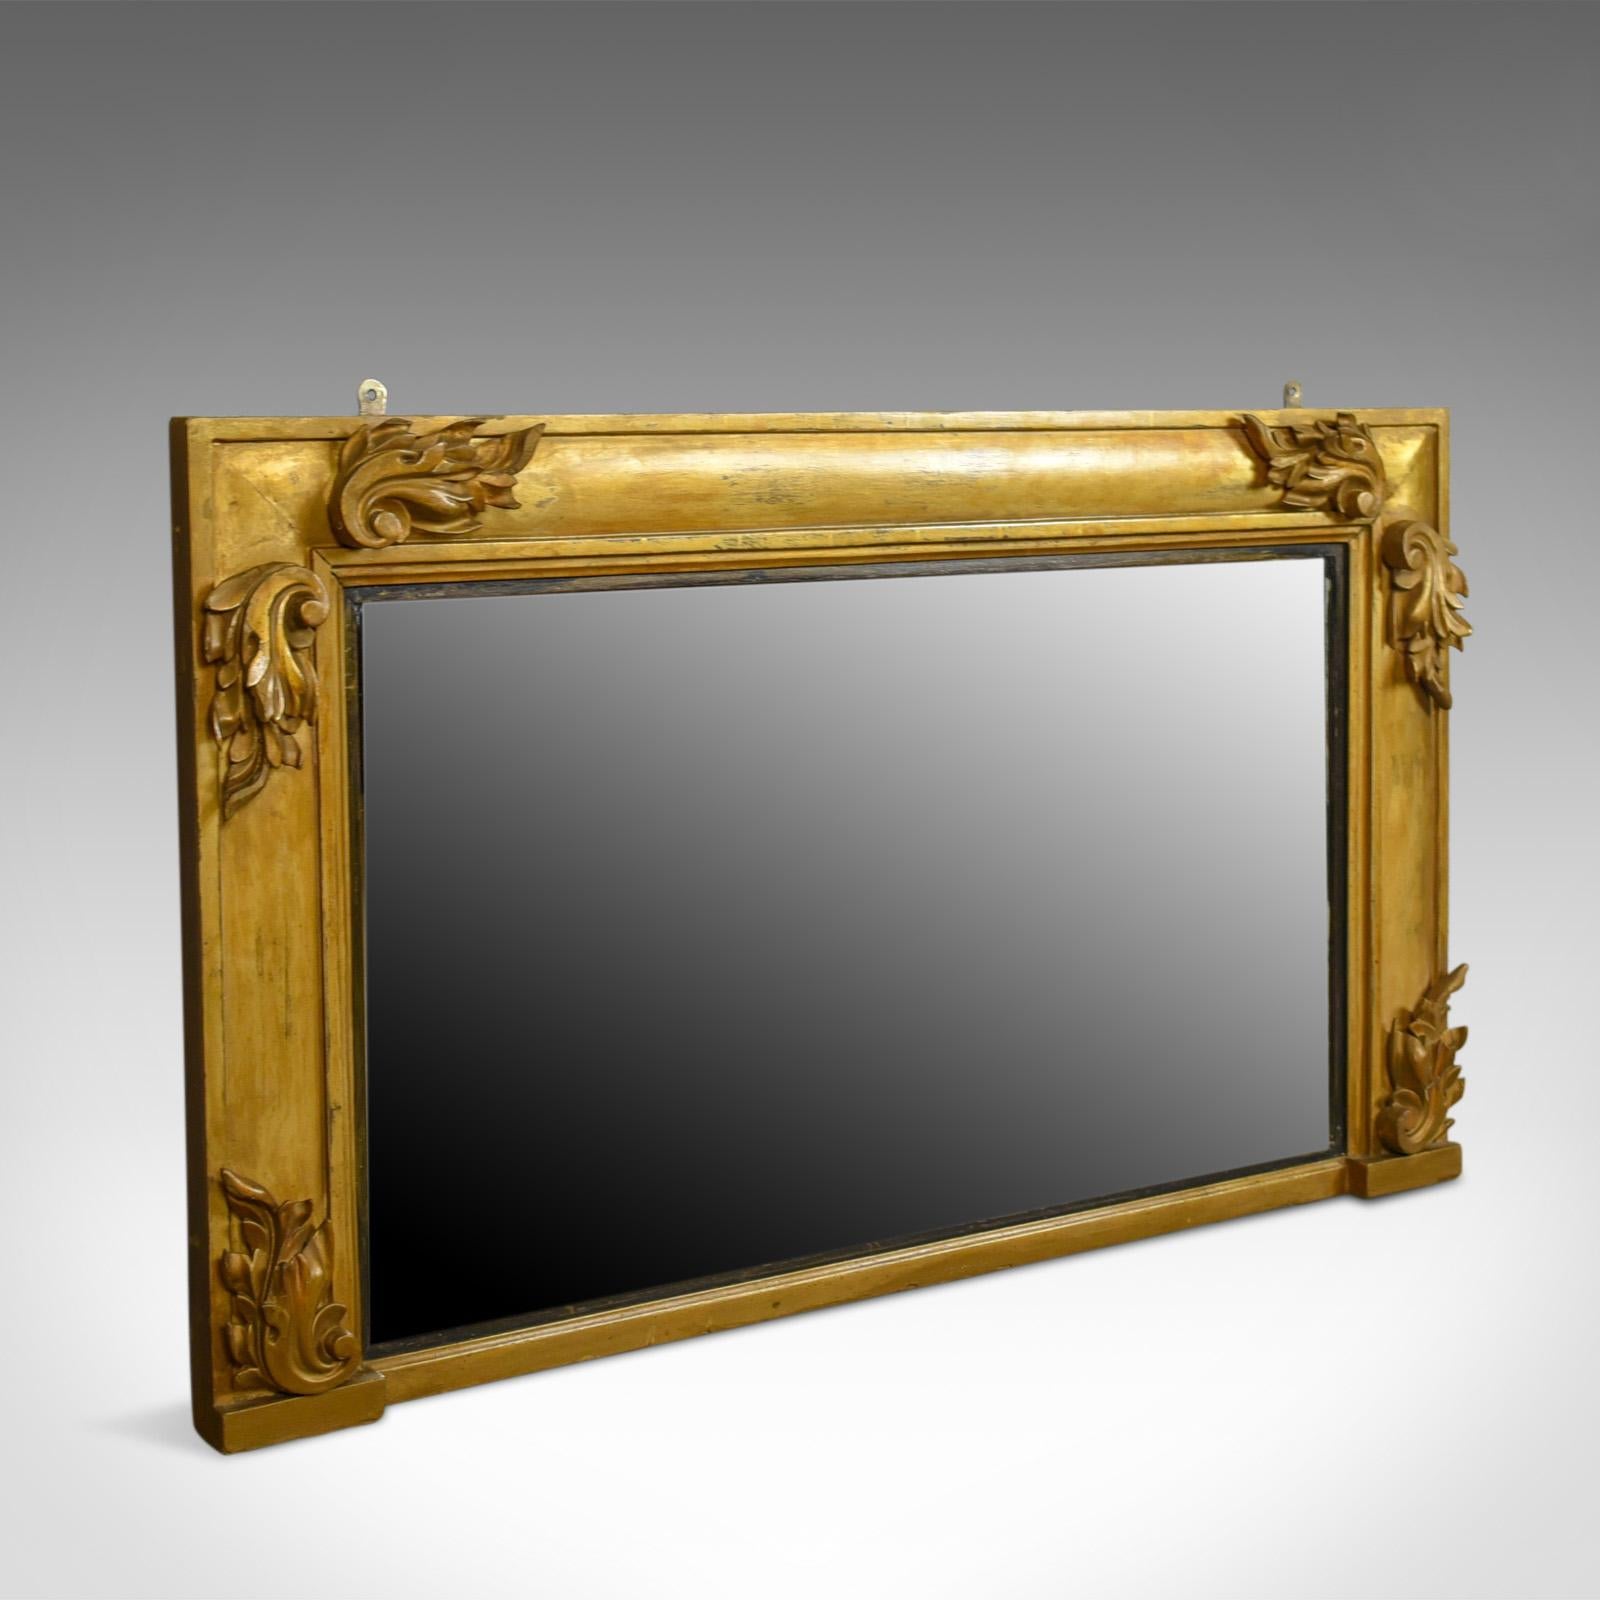 This is an antique overmantel mirror, an English, Georgian wall mirror in giltwood and gesso frame dating to circa 1800.

Attractive golden tones in the giltwood frame
Three-quarter, broad cushion moulding 
Standing upon a breakfront